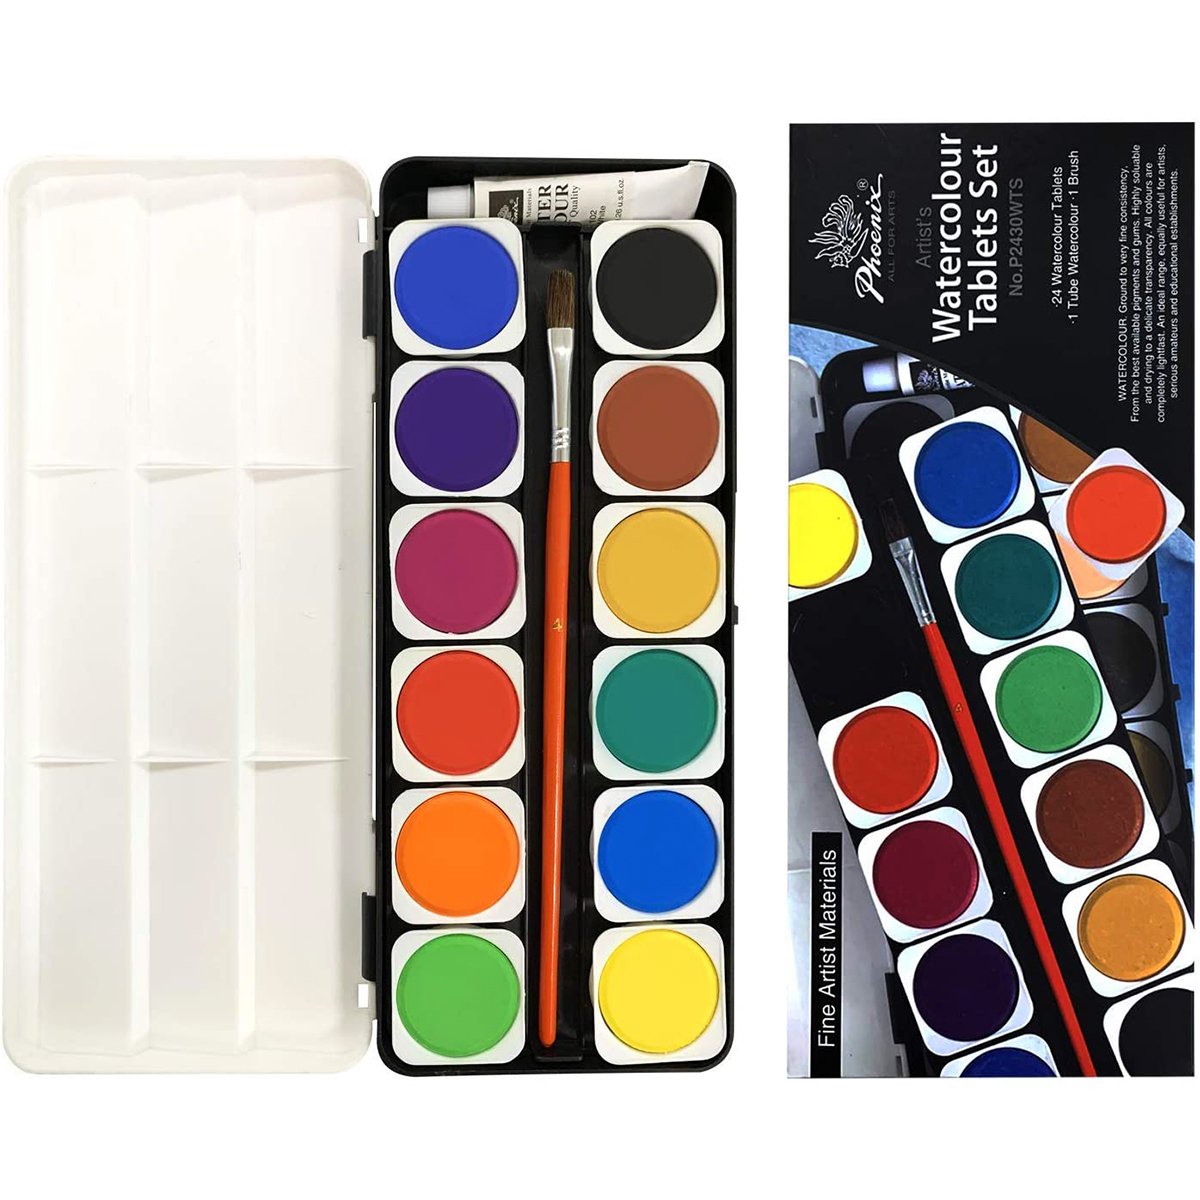 Great2bcColorful Watercolor Tablets Set - 25 Colors